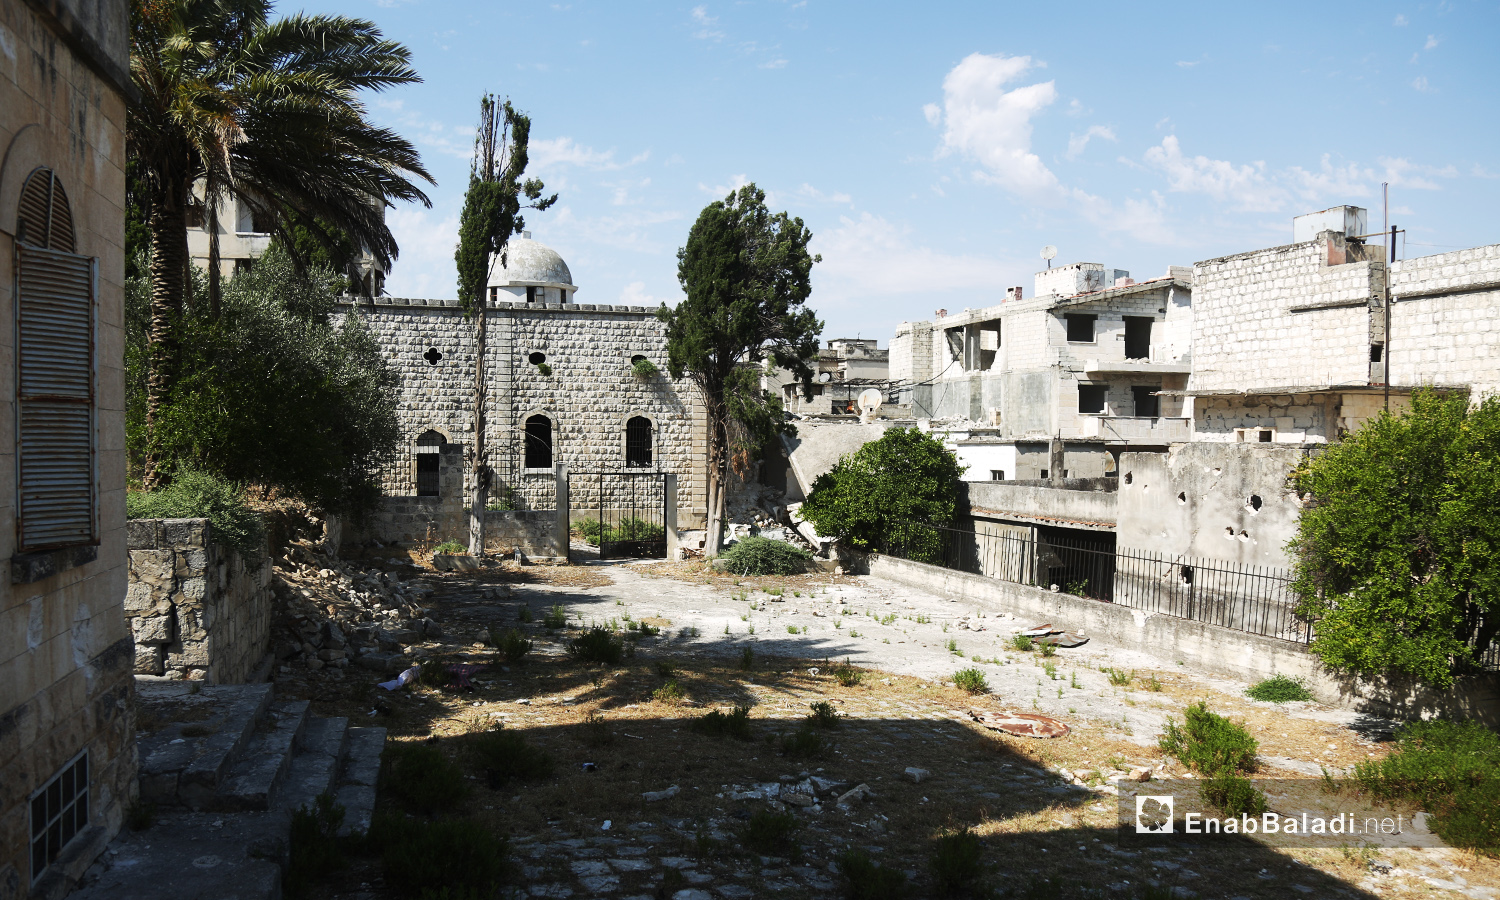 “Mar Georges” Church for the Greek Orthodox in Jisr al-Shughur city in the Southern Idlib countryside still has its structure despite being bombed during the war years in Syria – July 2020 (Enab Baladi)